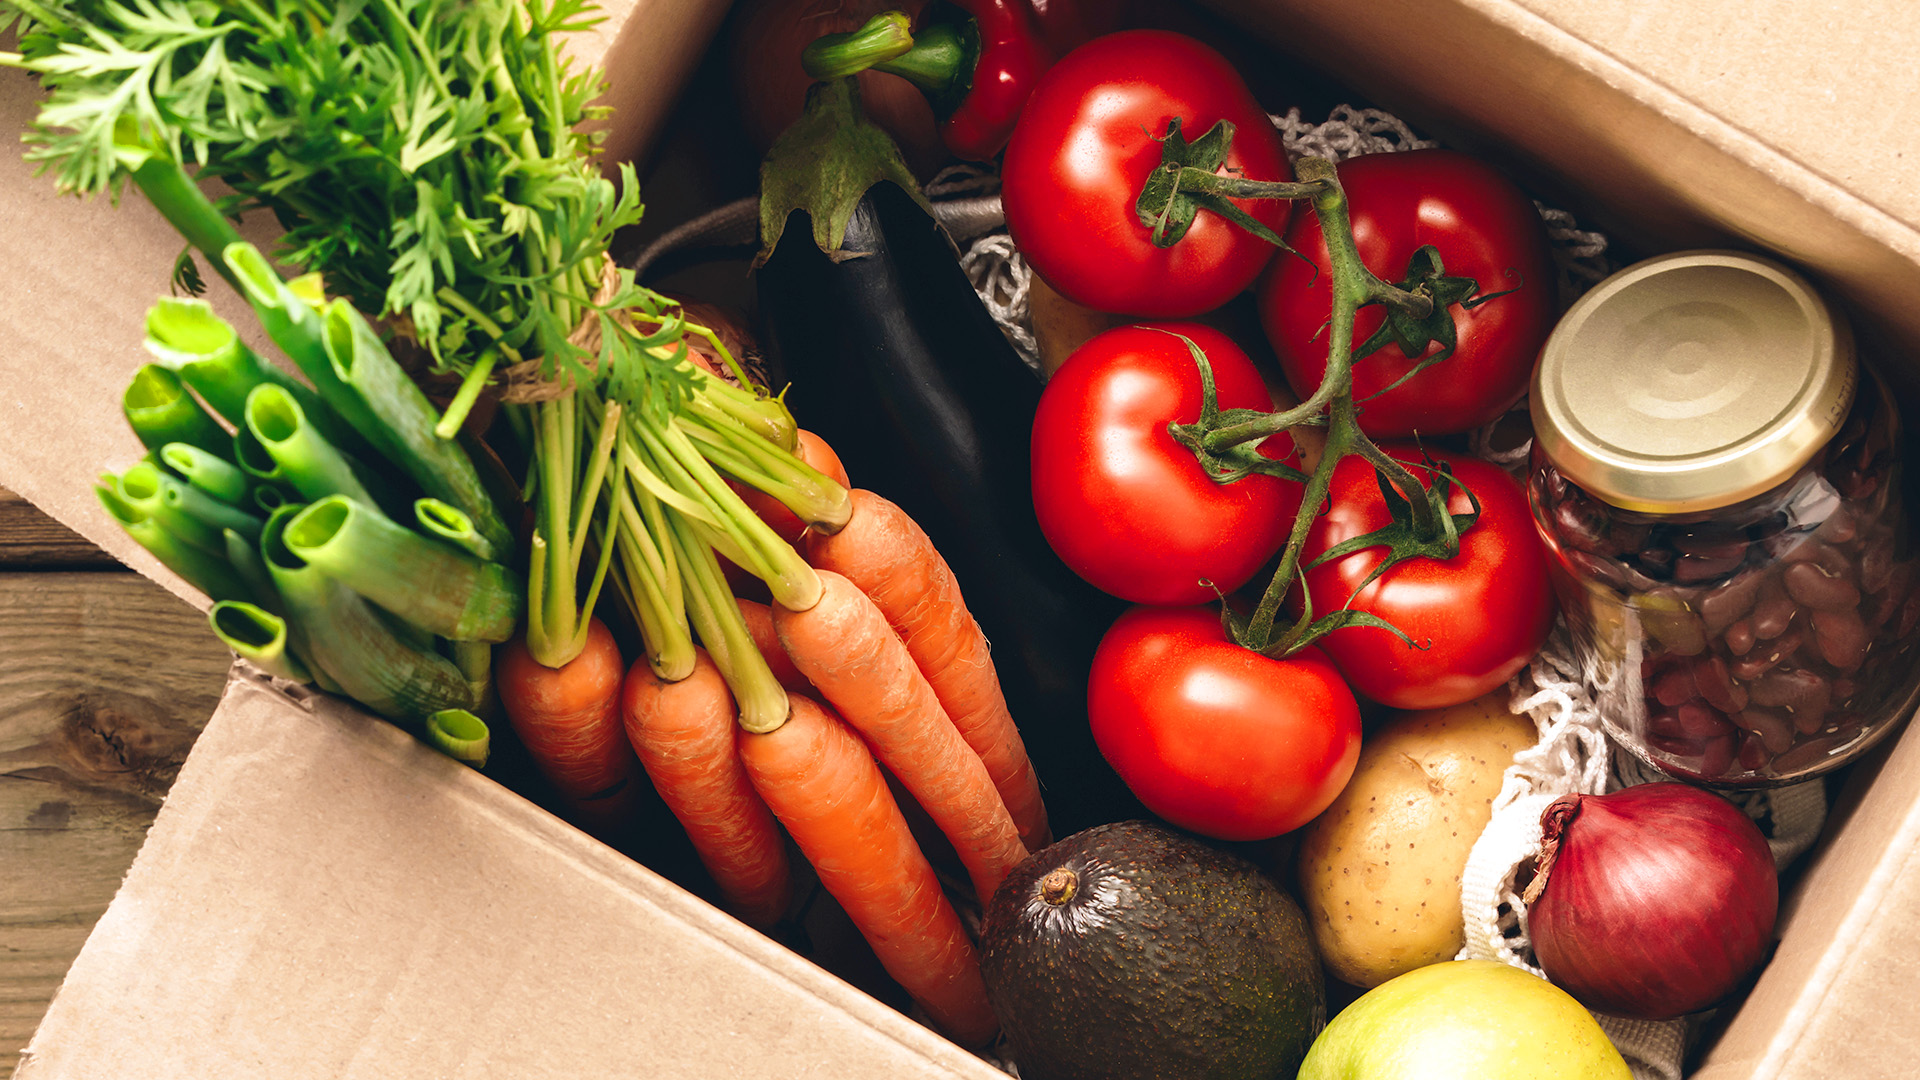 A cardboard box filled with fresh vegetables and fruit from Whole Foods Coop Duluth, including carrots with green tops, tomatoes on the vine, an eggplant, scallions, a potato, an avocado, a red onion, and a lemon. A jar of beans is also visible among the produce.